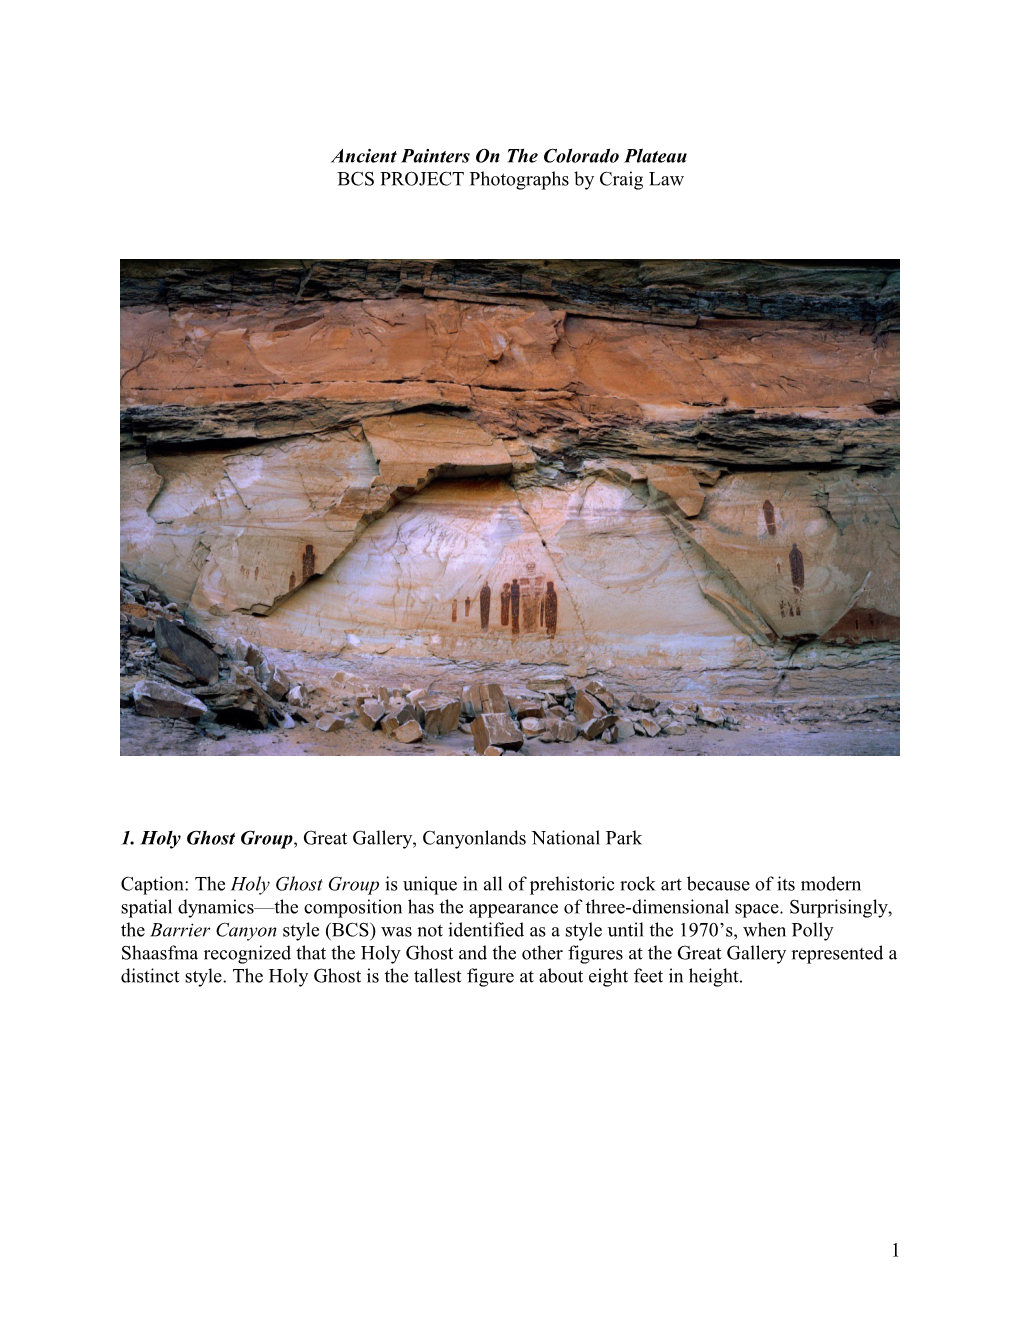 Ancient Painters on the Colorado Plateau